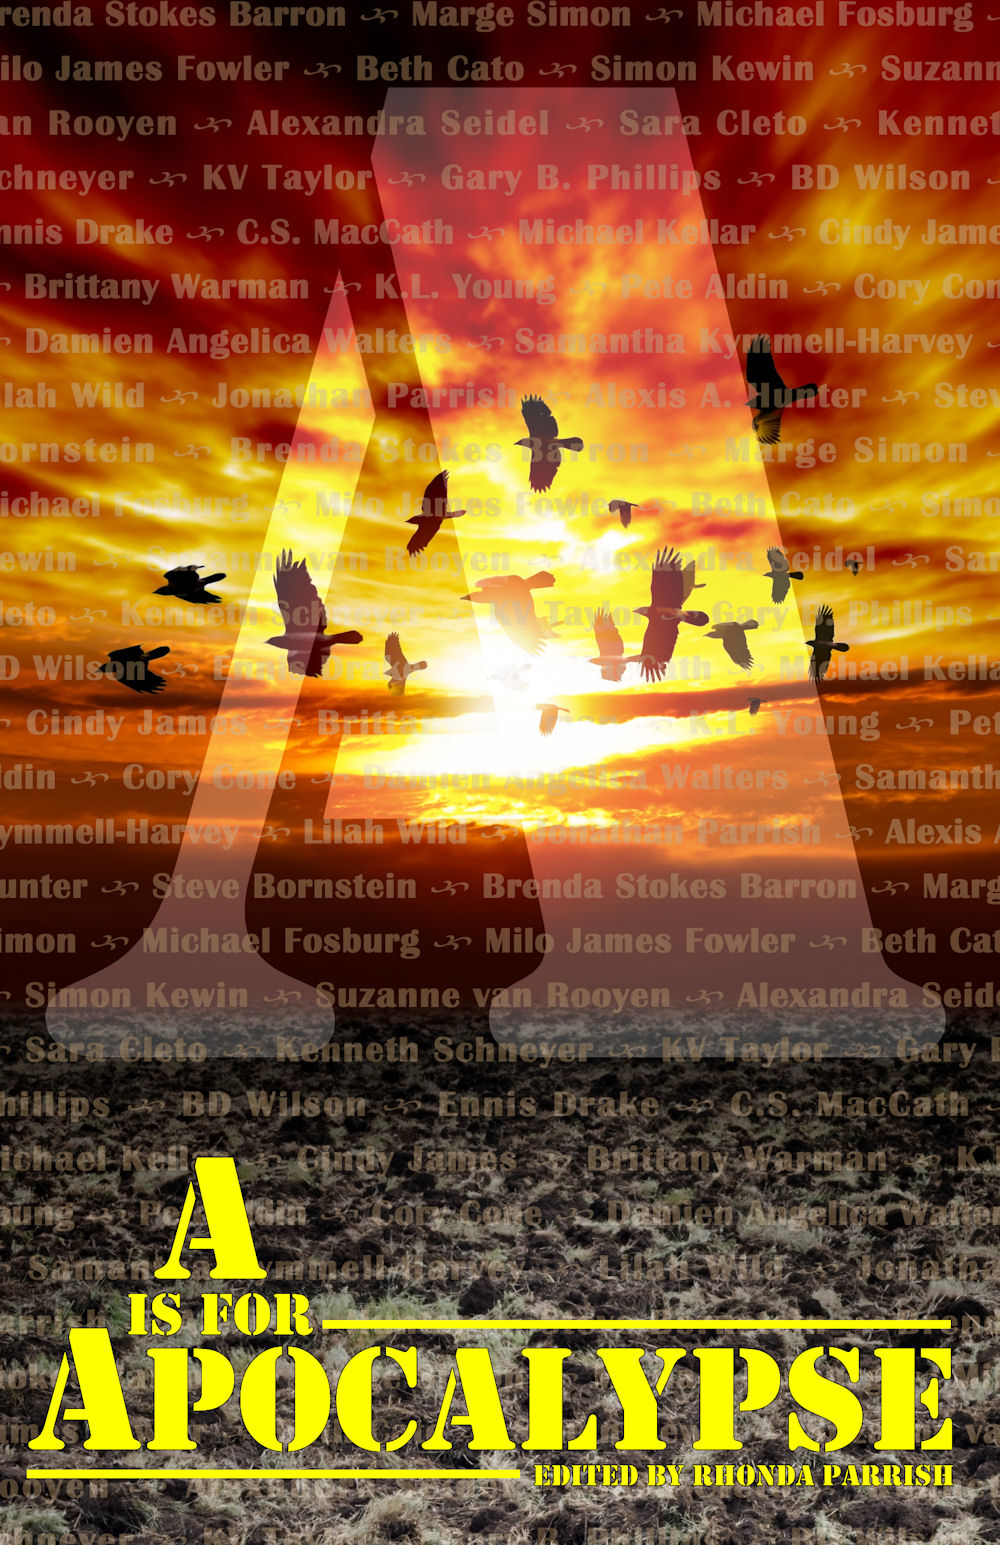 A is for Apocalypse for $0.99!